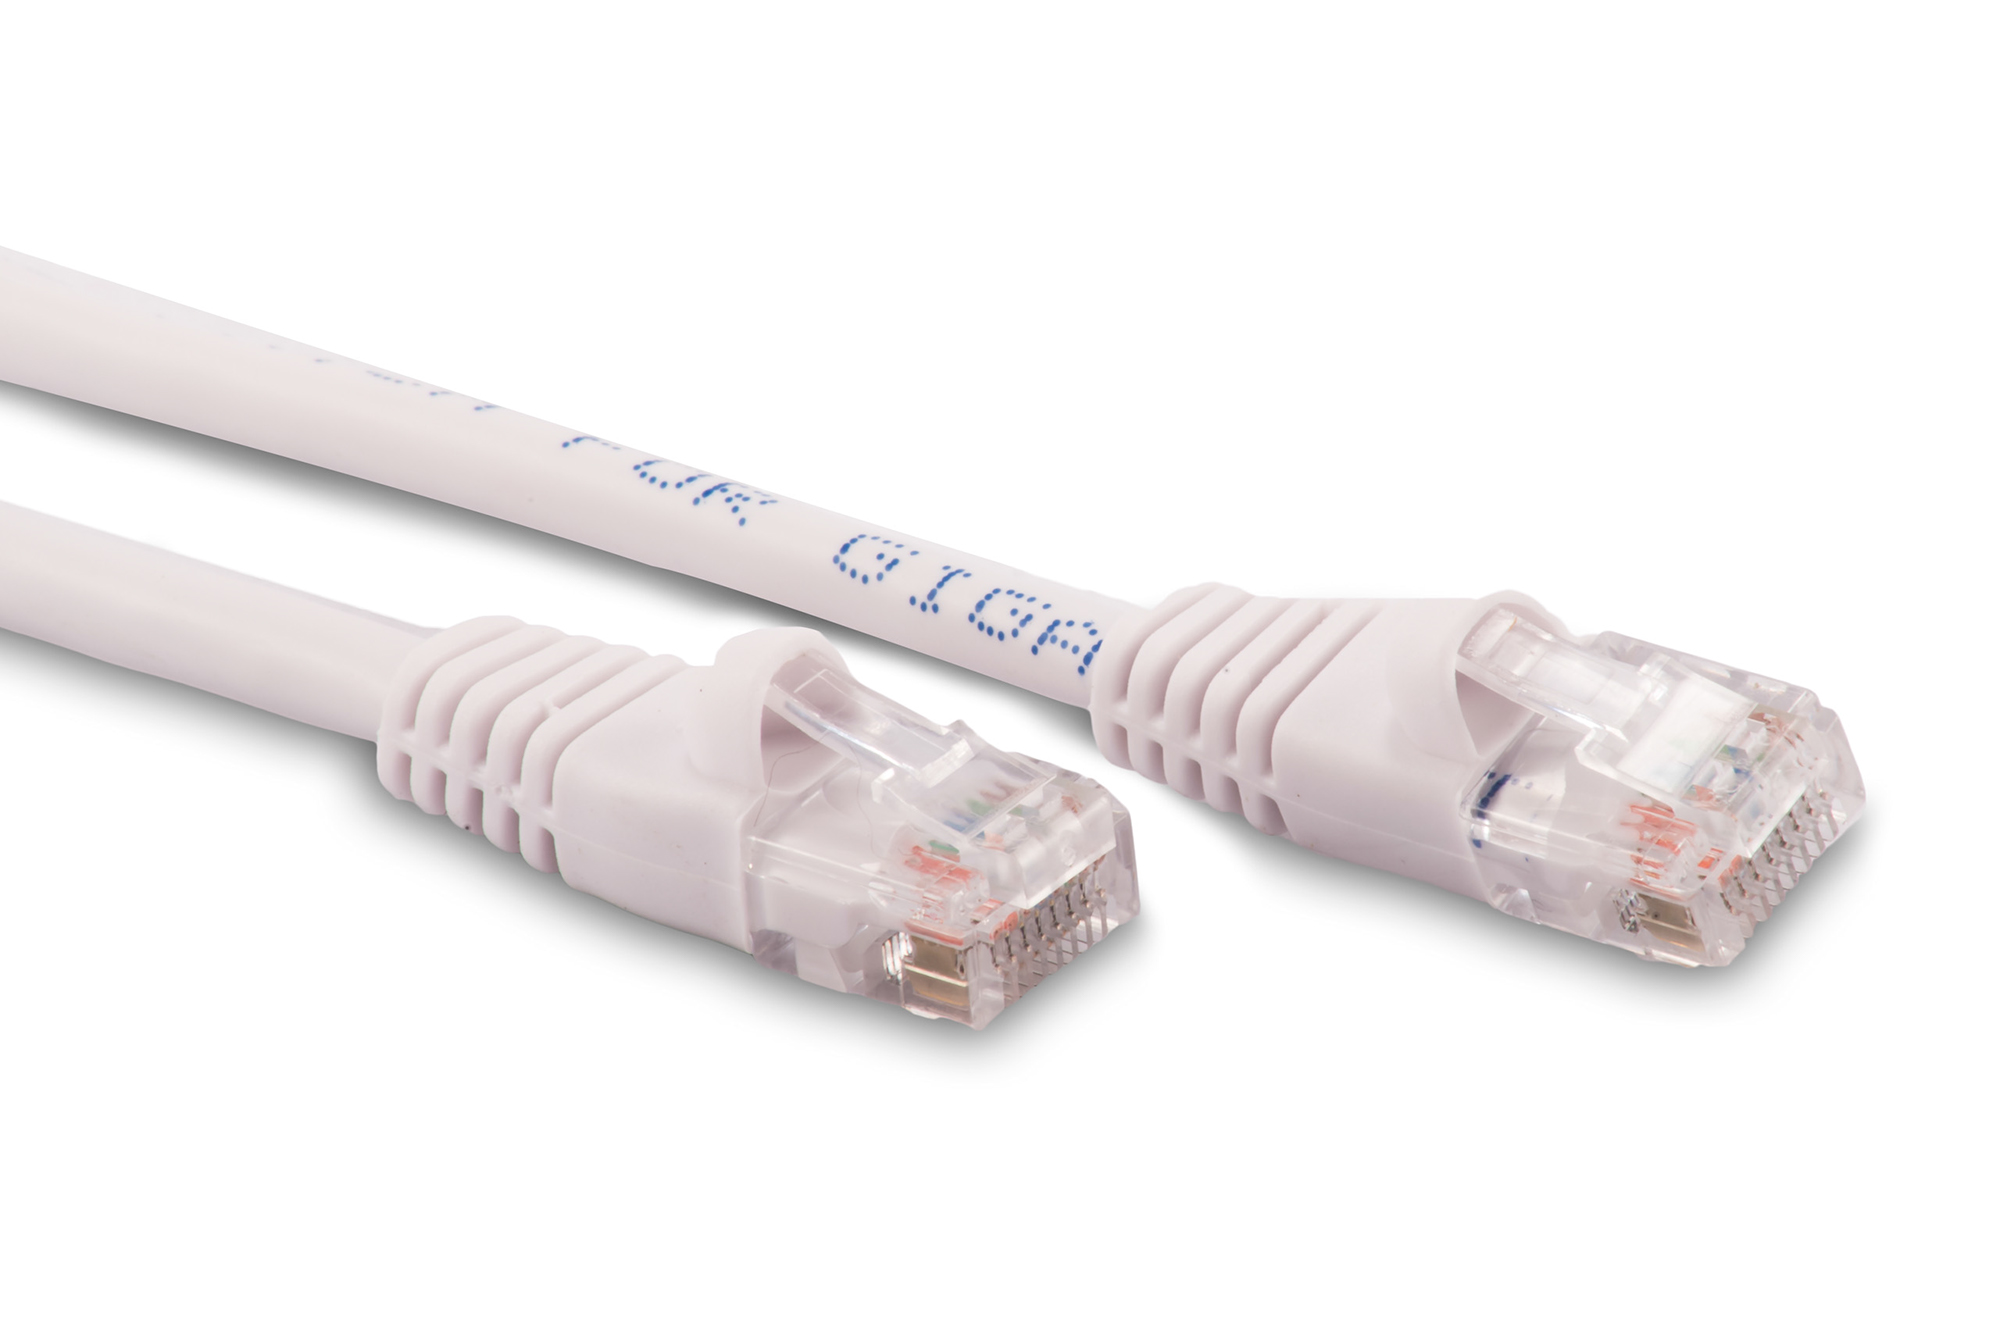 3ft Cat6 Ethernet Patch Cable - White Color - Snagless Boot